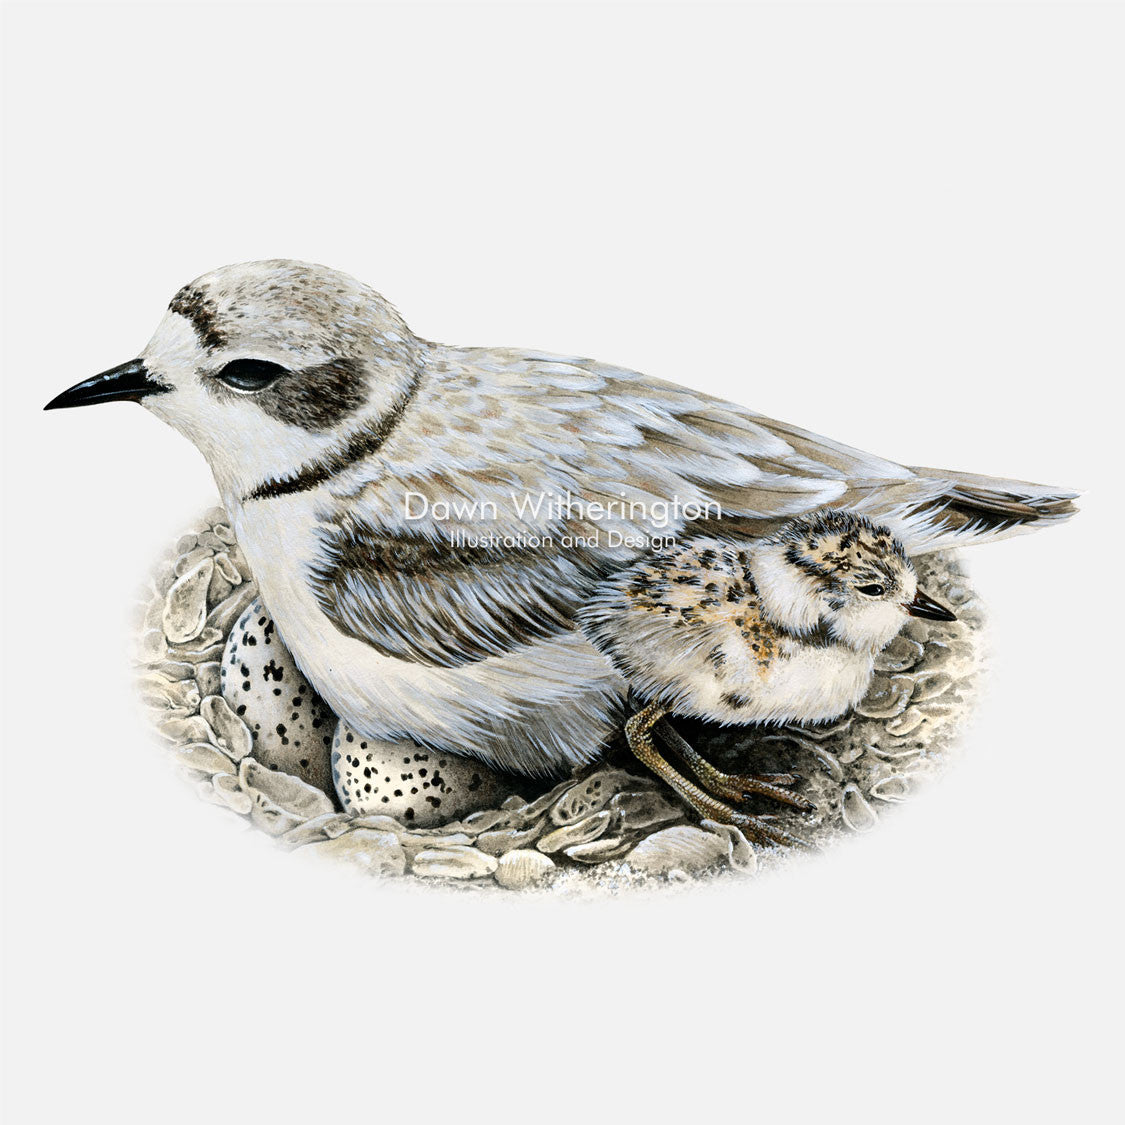 This beautiful illustration of a snowy plover, Charadrius nivosus, with chick, is biologically accurate in detail.